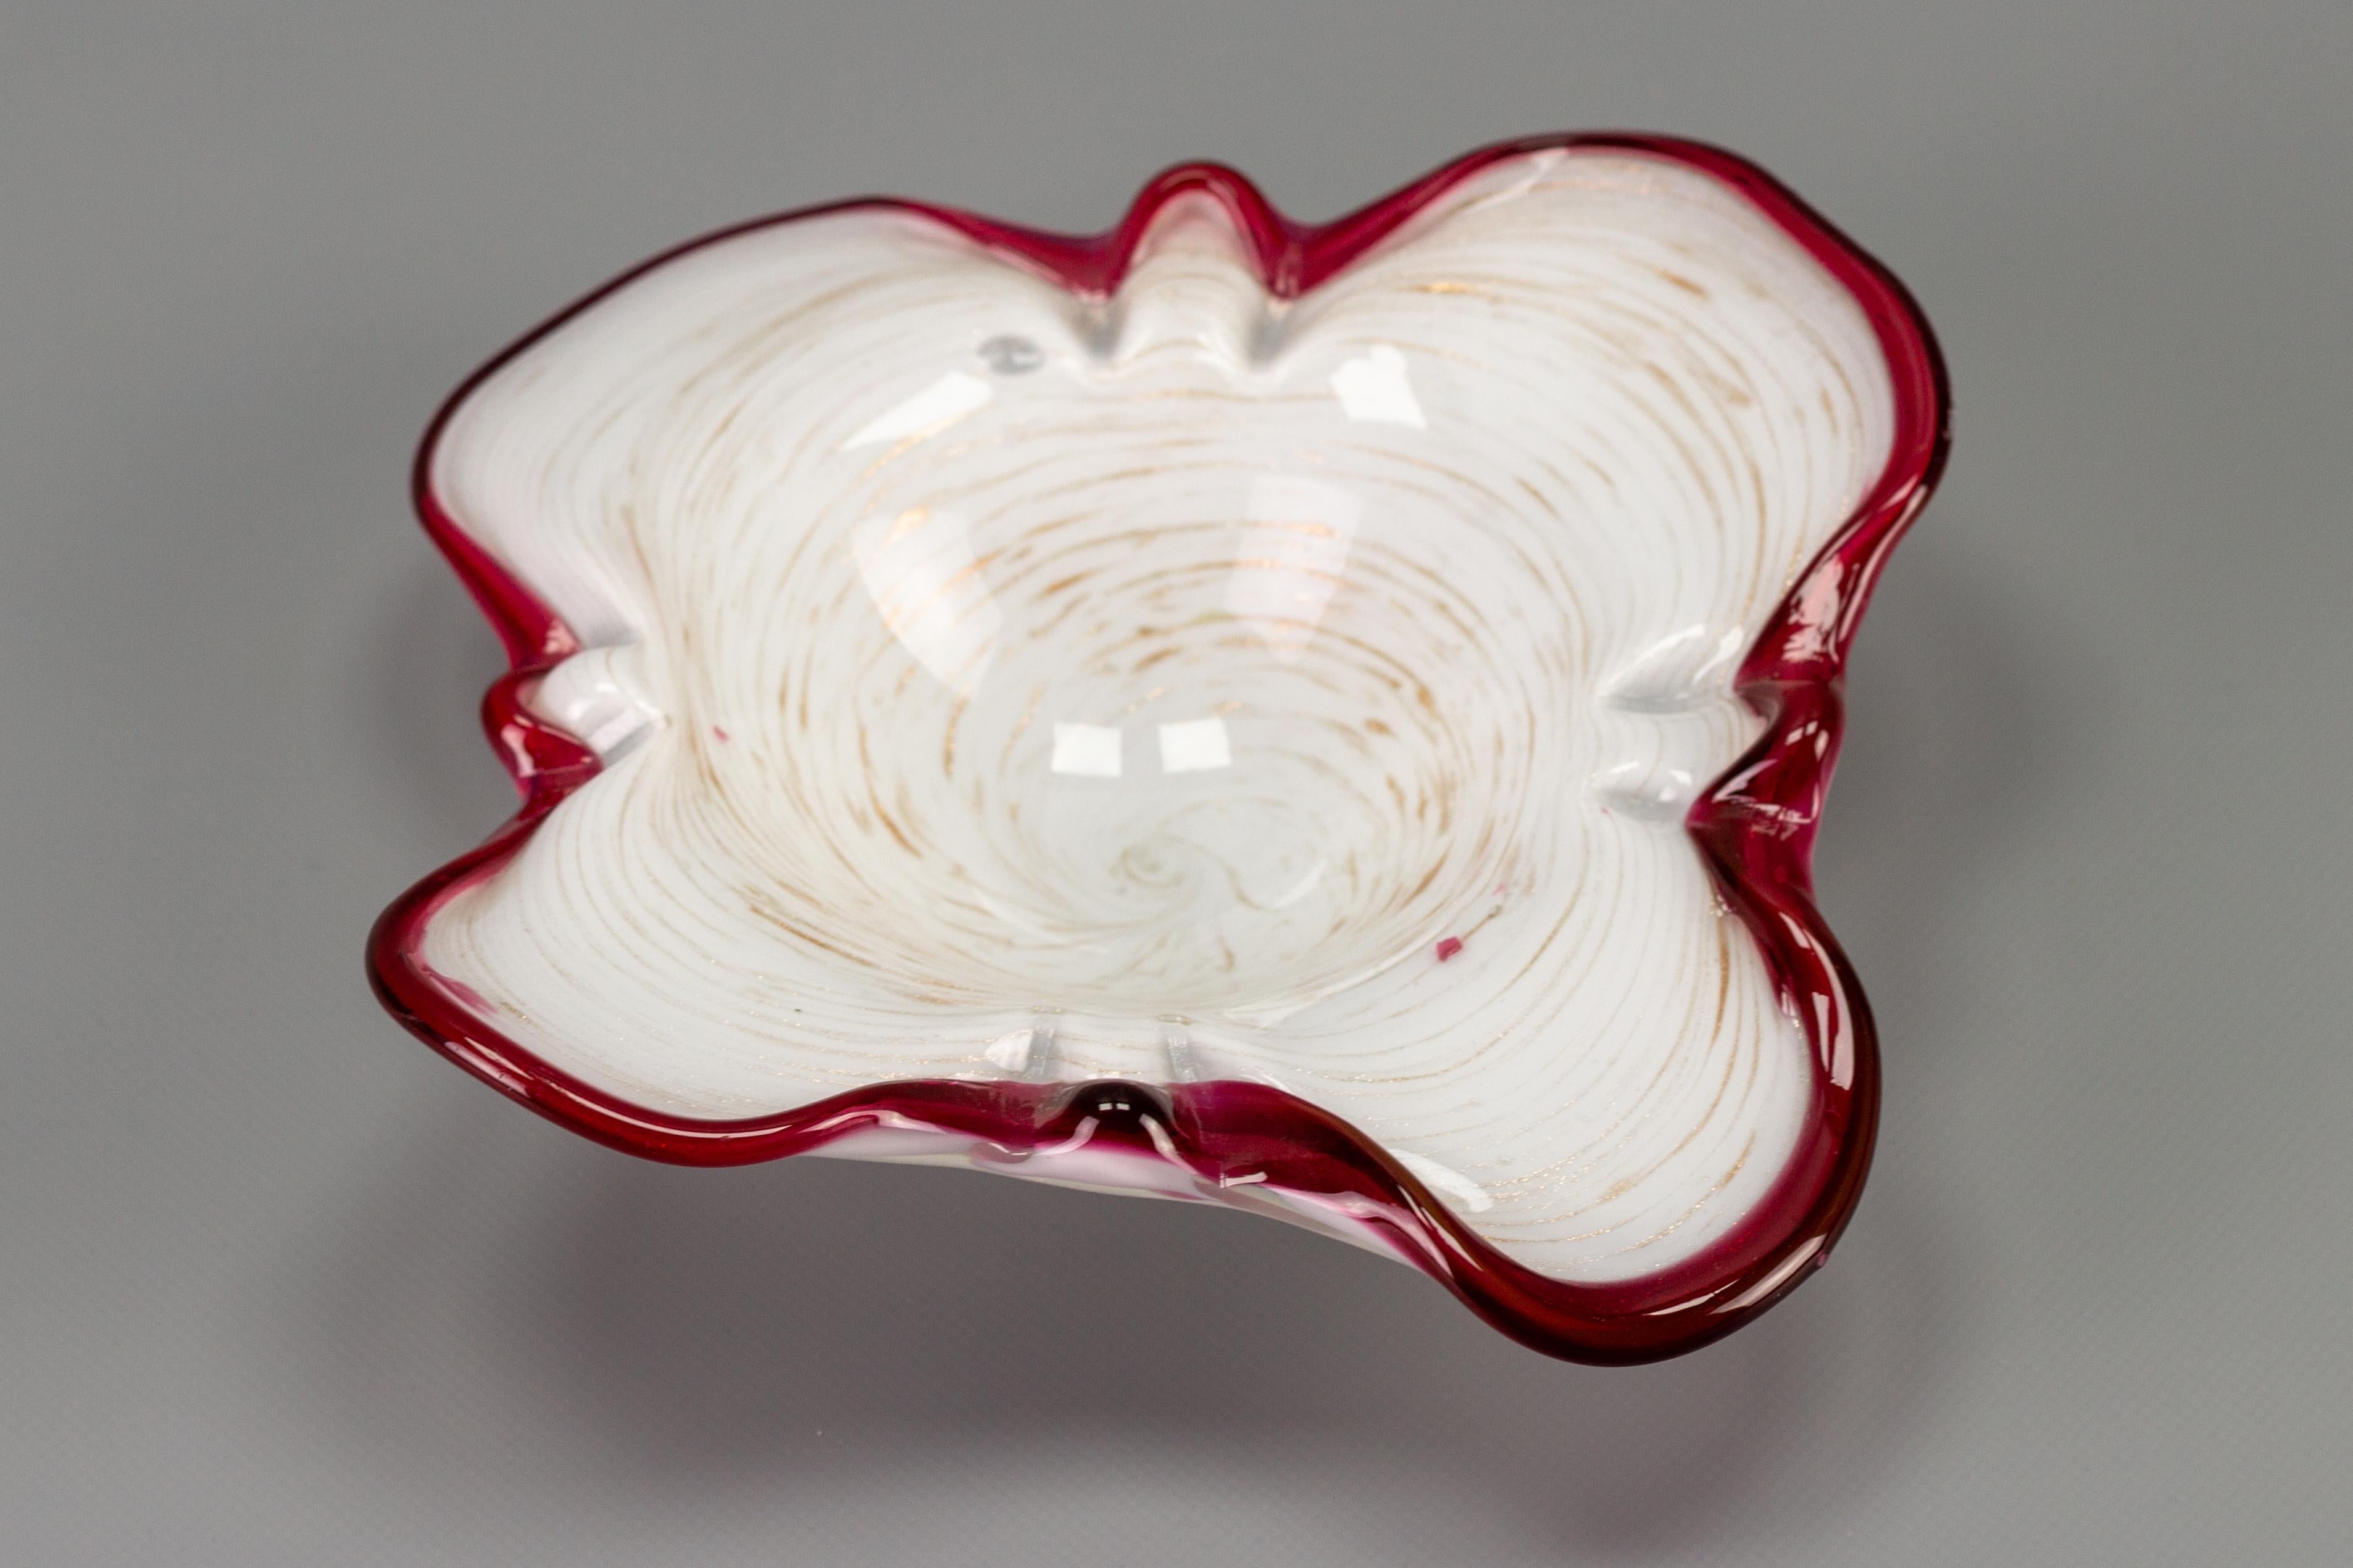 Gorgeous Murano handblown white, red, and gold dust Italian art glass bowl. Pretty beautiful to be used as a jewelry bowl or candy dish or to display in a set with other Murano glass bowls. Adorable display piece on any table.
Dimensions: height